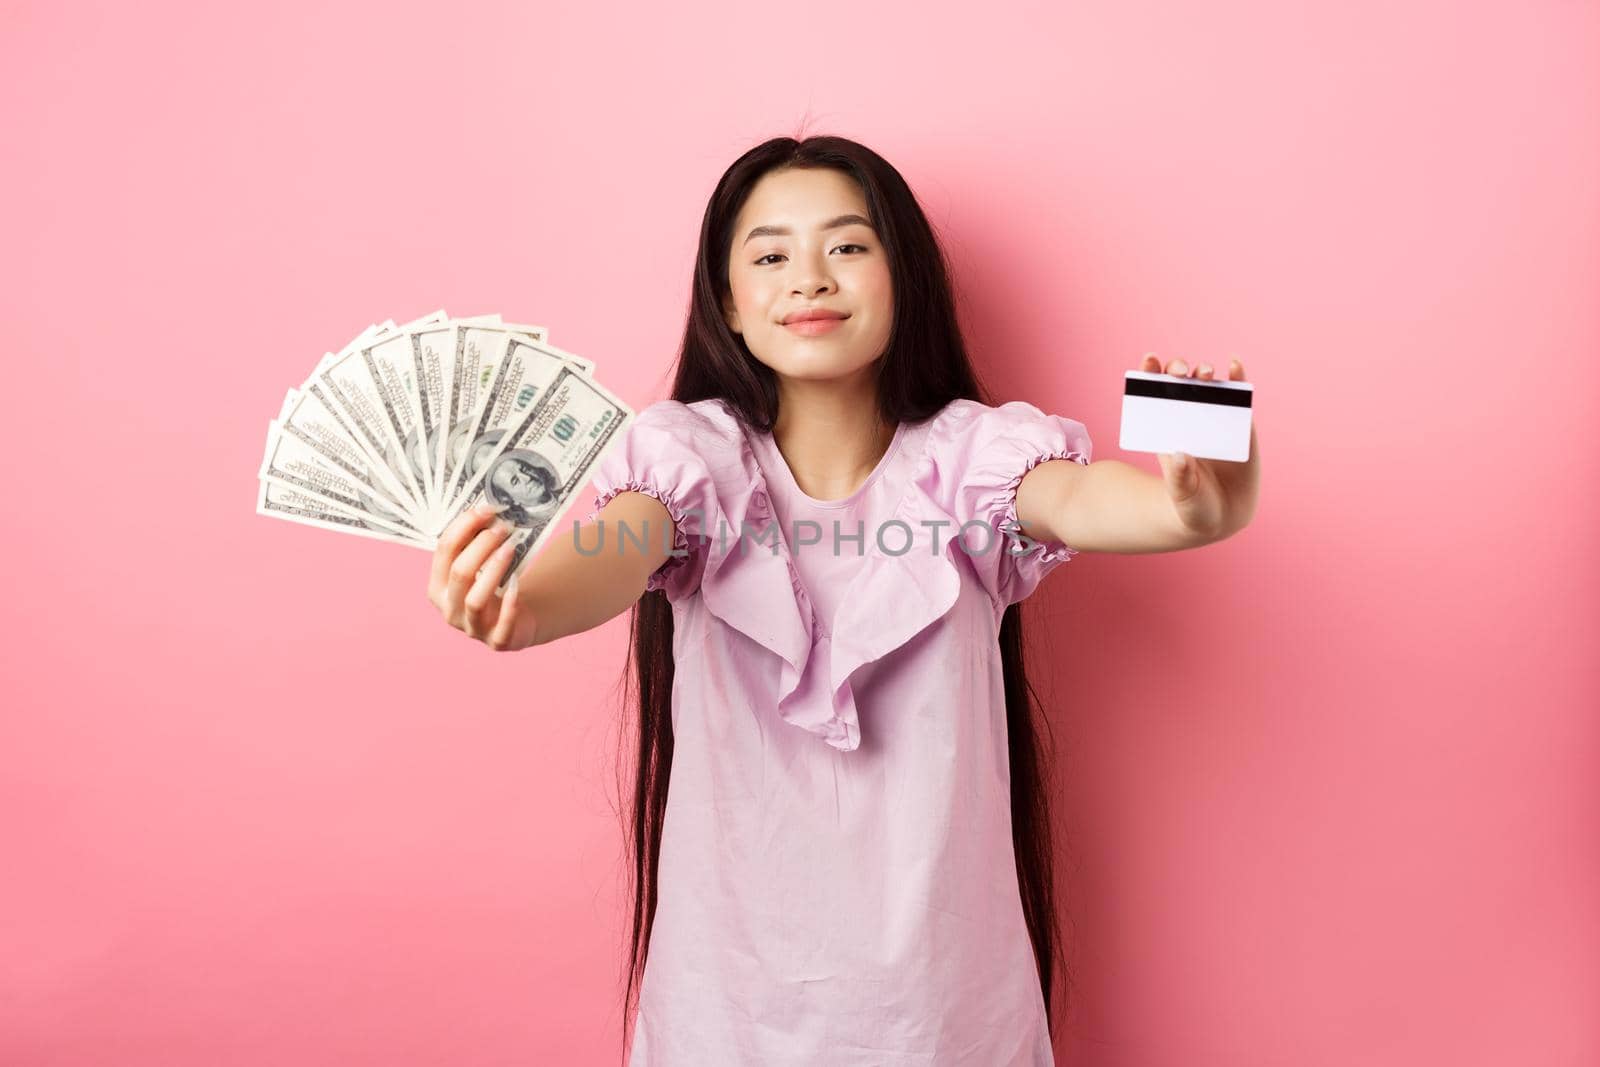 Beautiful asian woman showing plastic credit card and dollar bills, smiling pleased, standing against pink background.